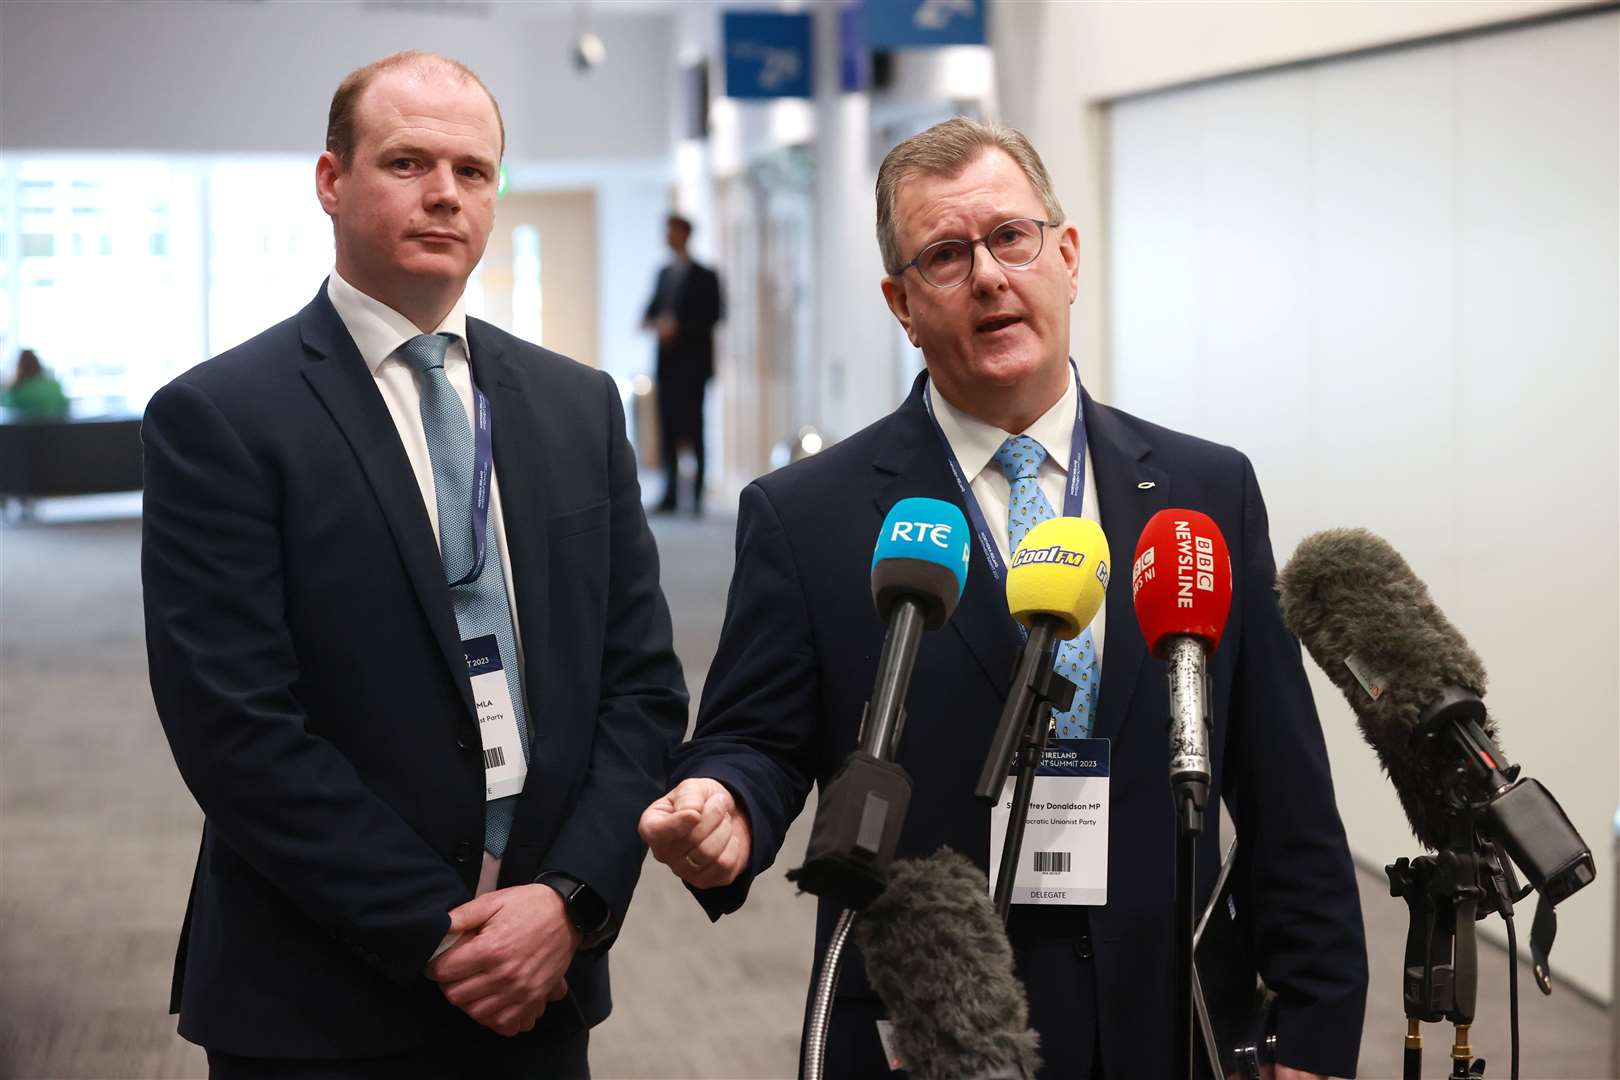 DUP leader Sir Jeffrey Donaldson, right, spoke with the media during the event (Liam McBurney/PA)